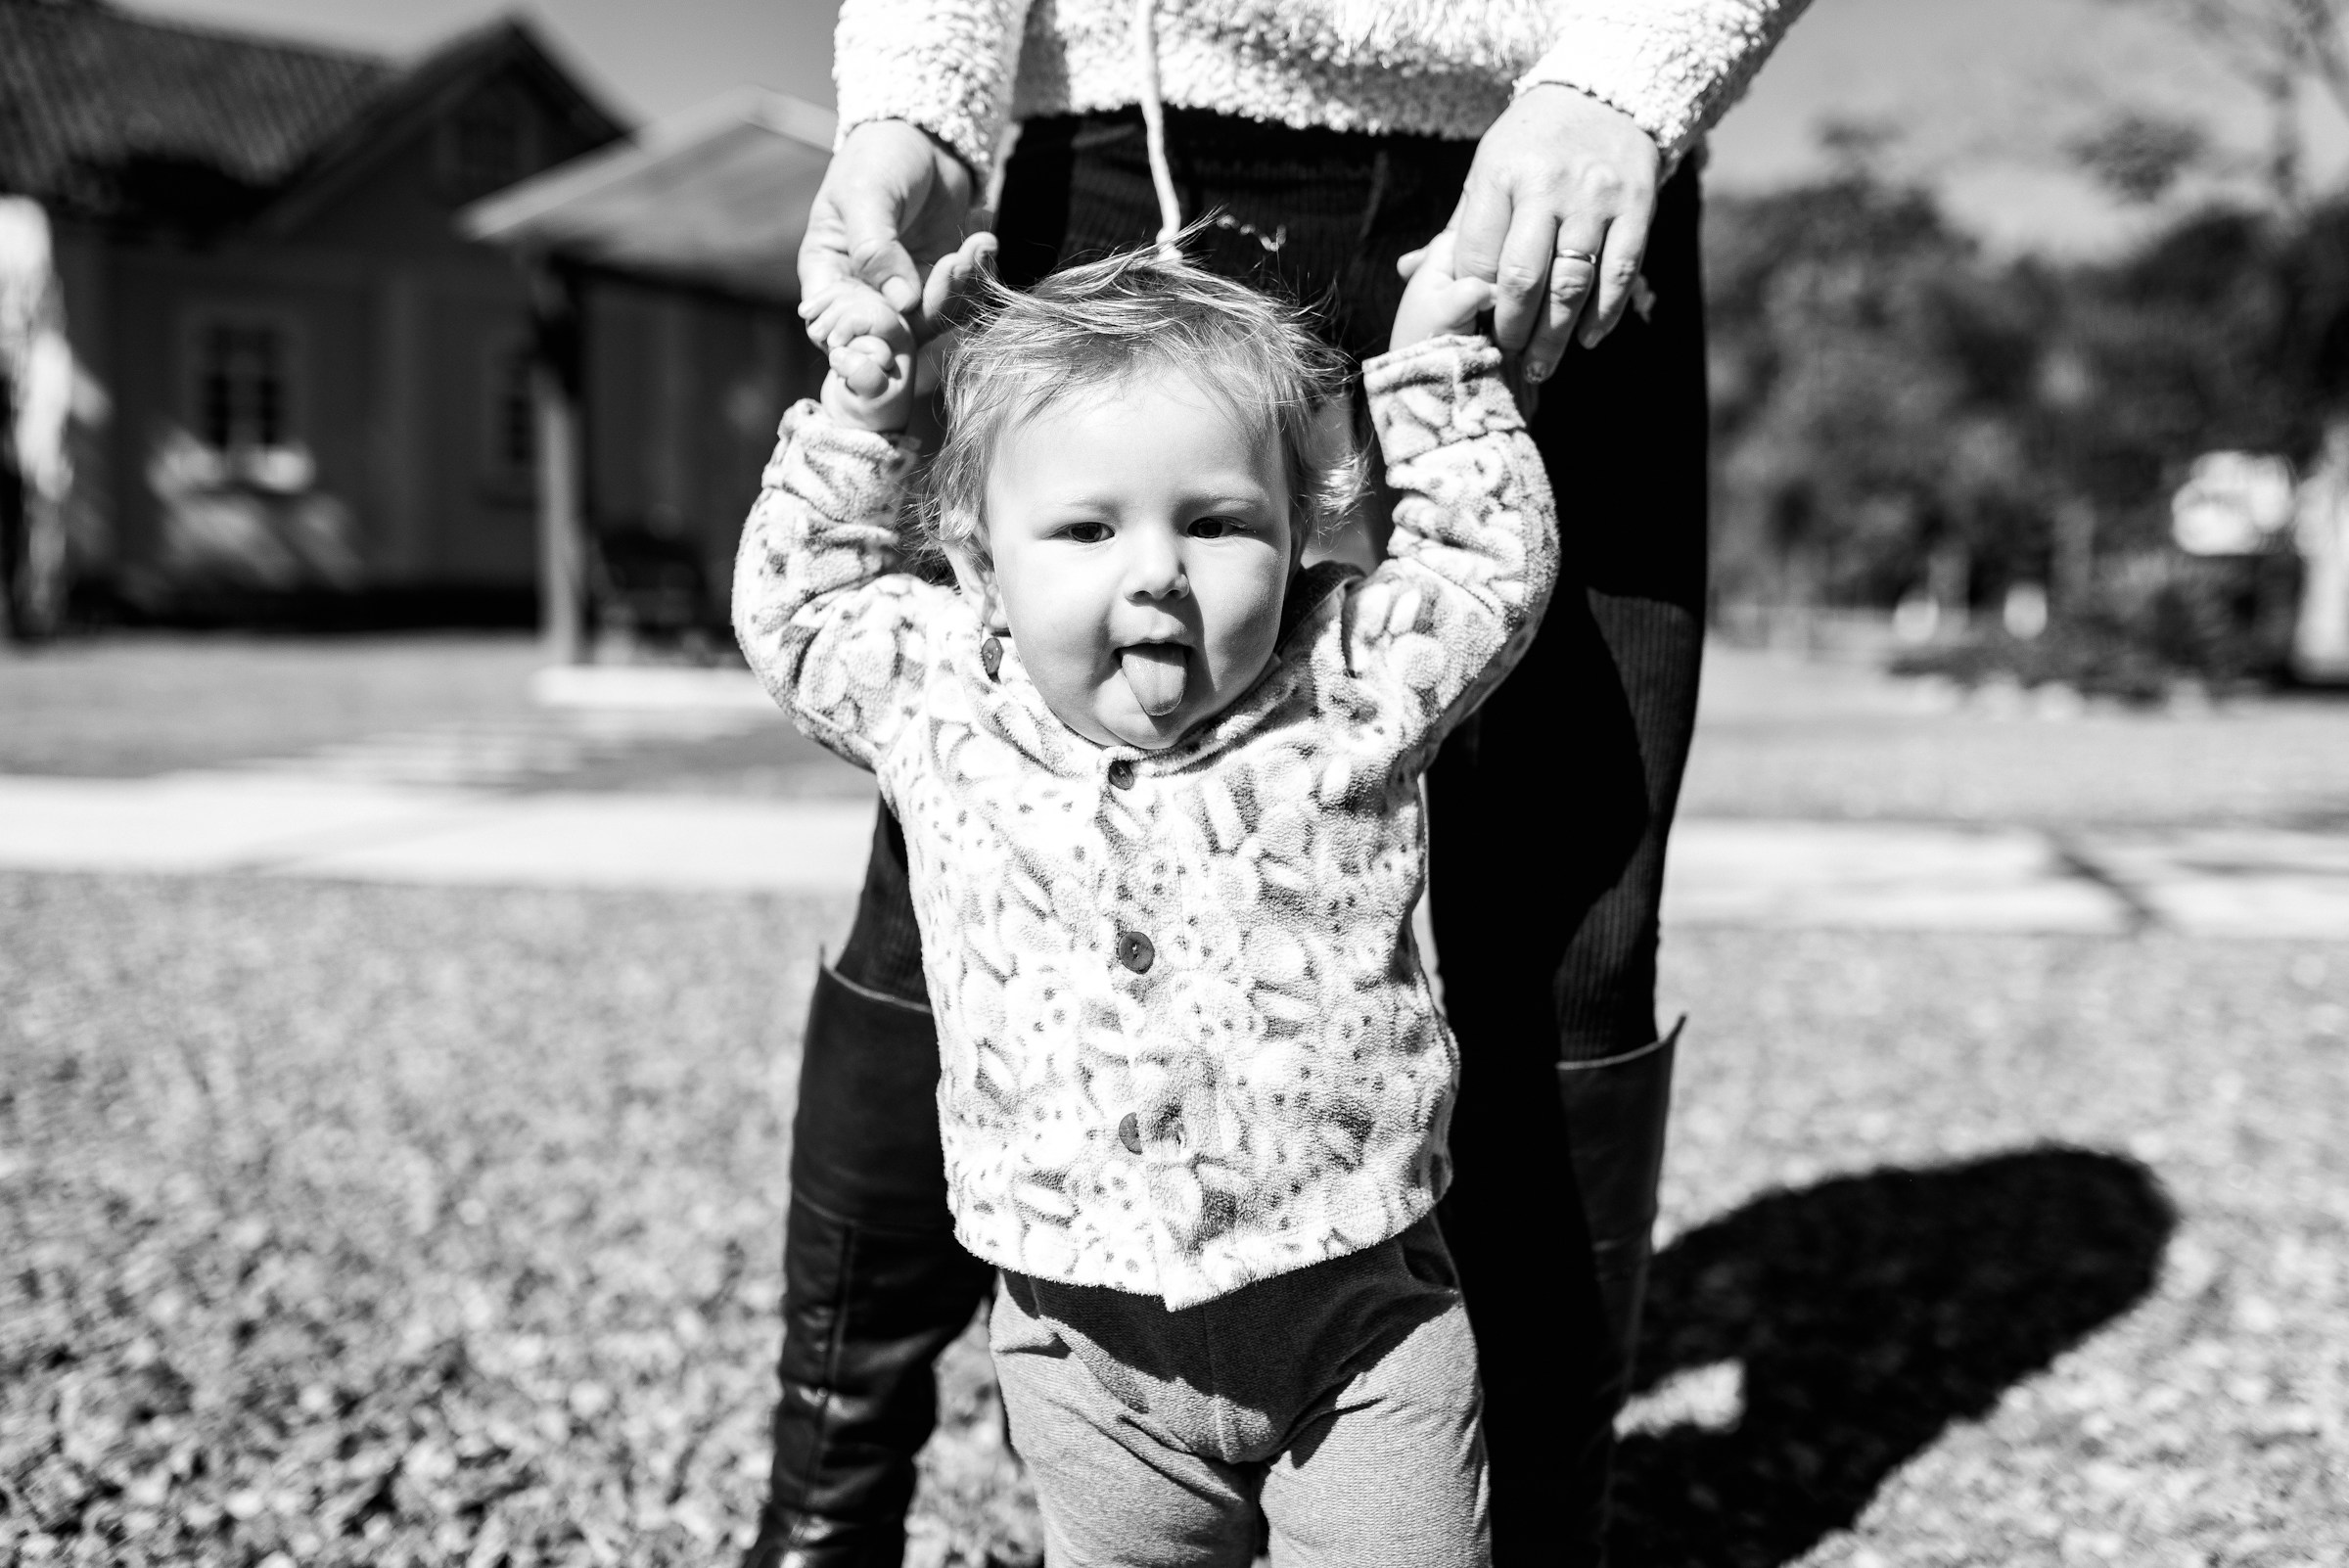 A person holding a baby's hands | Source: Unsplash